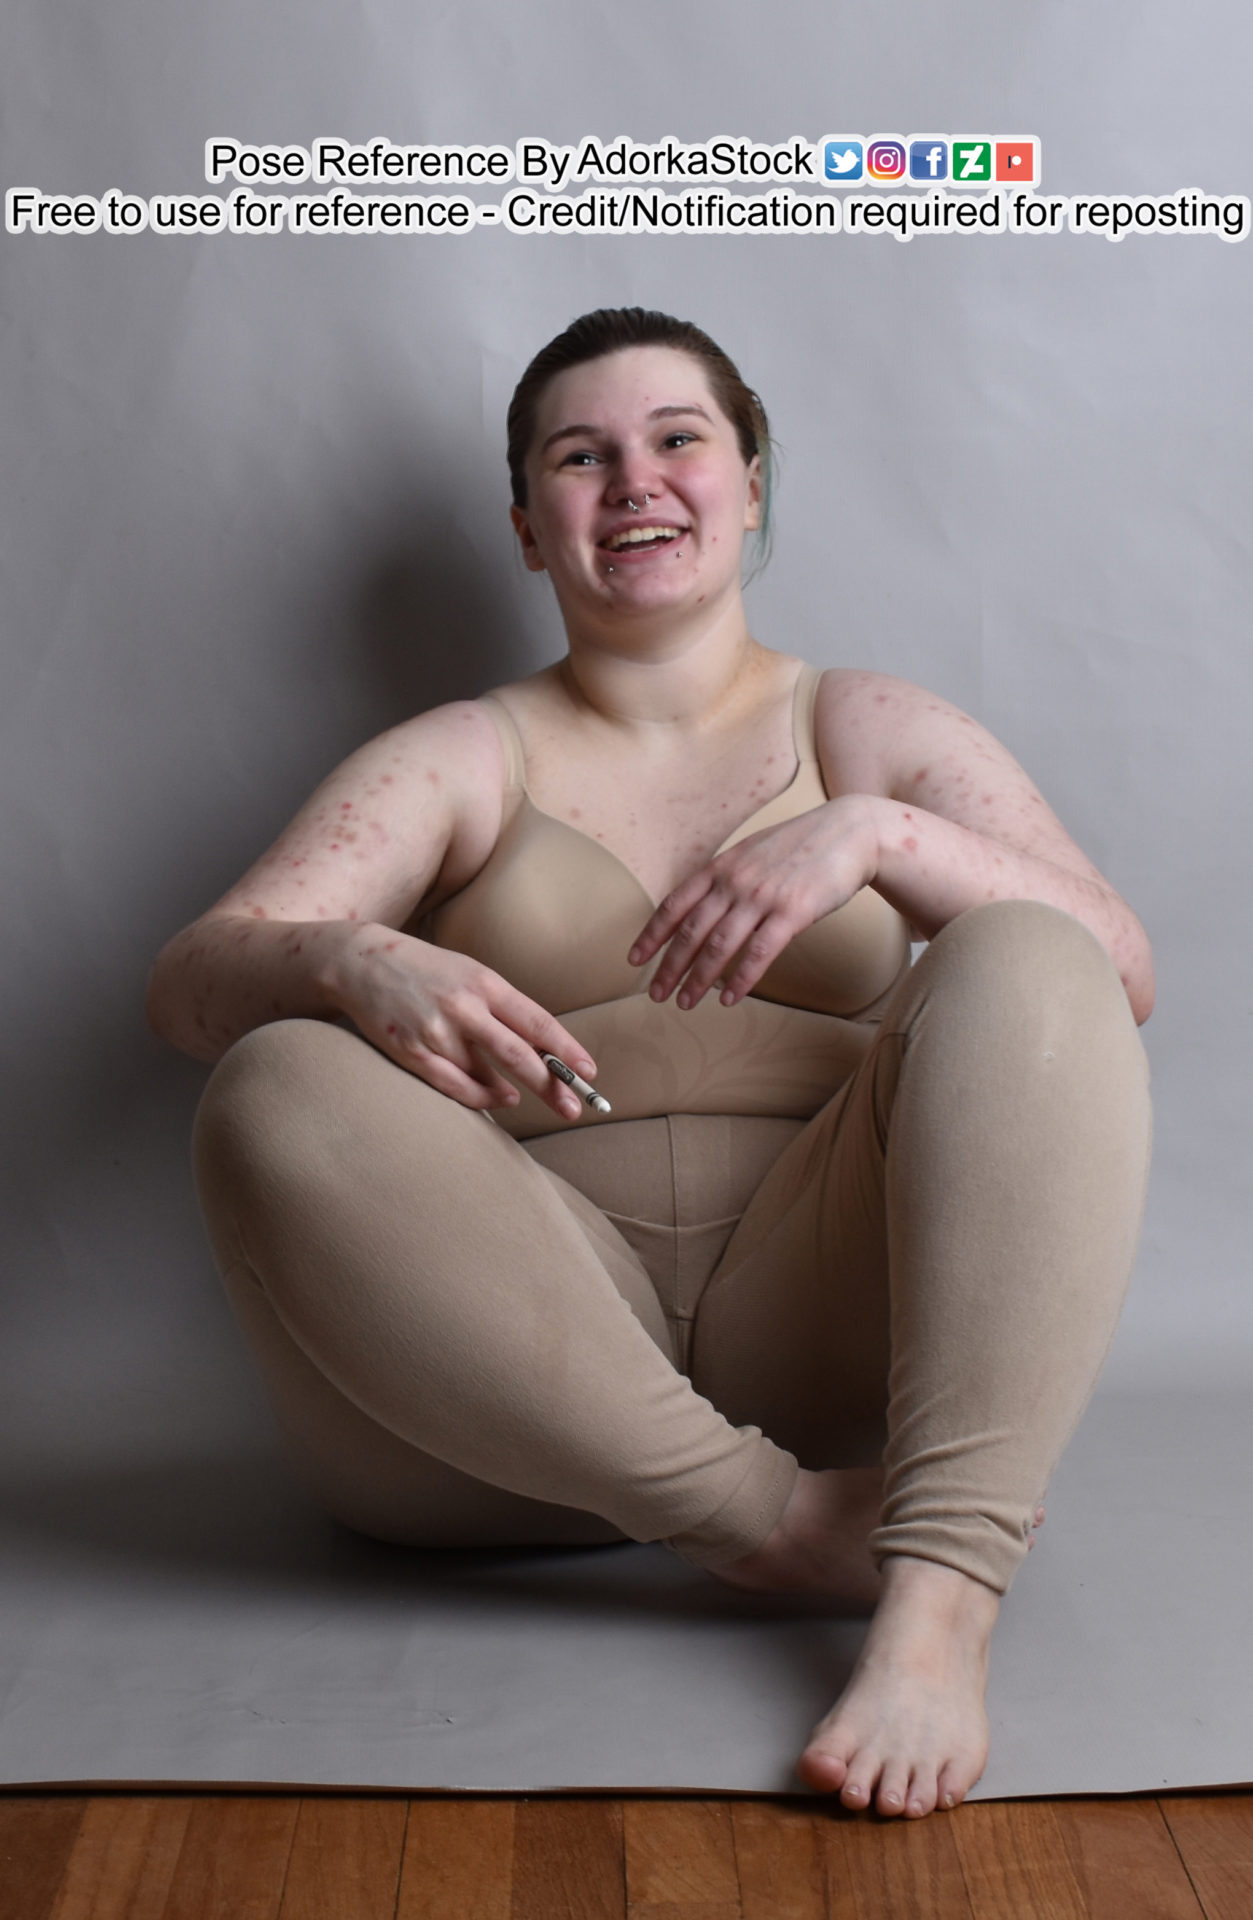 Pose reference model sitting on the ground with feet closer to the camera, arms resting on the knees, one hand holding a crayon like a cigarette. The model is leaning back and laughing a bit.